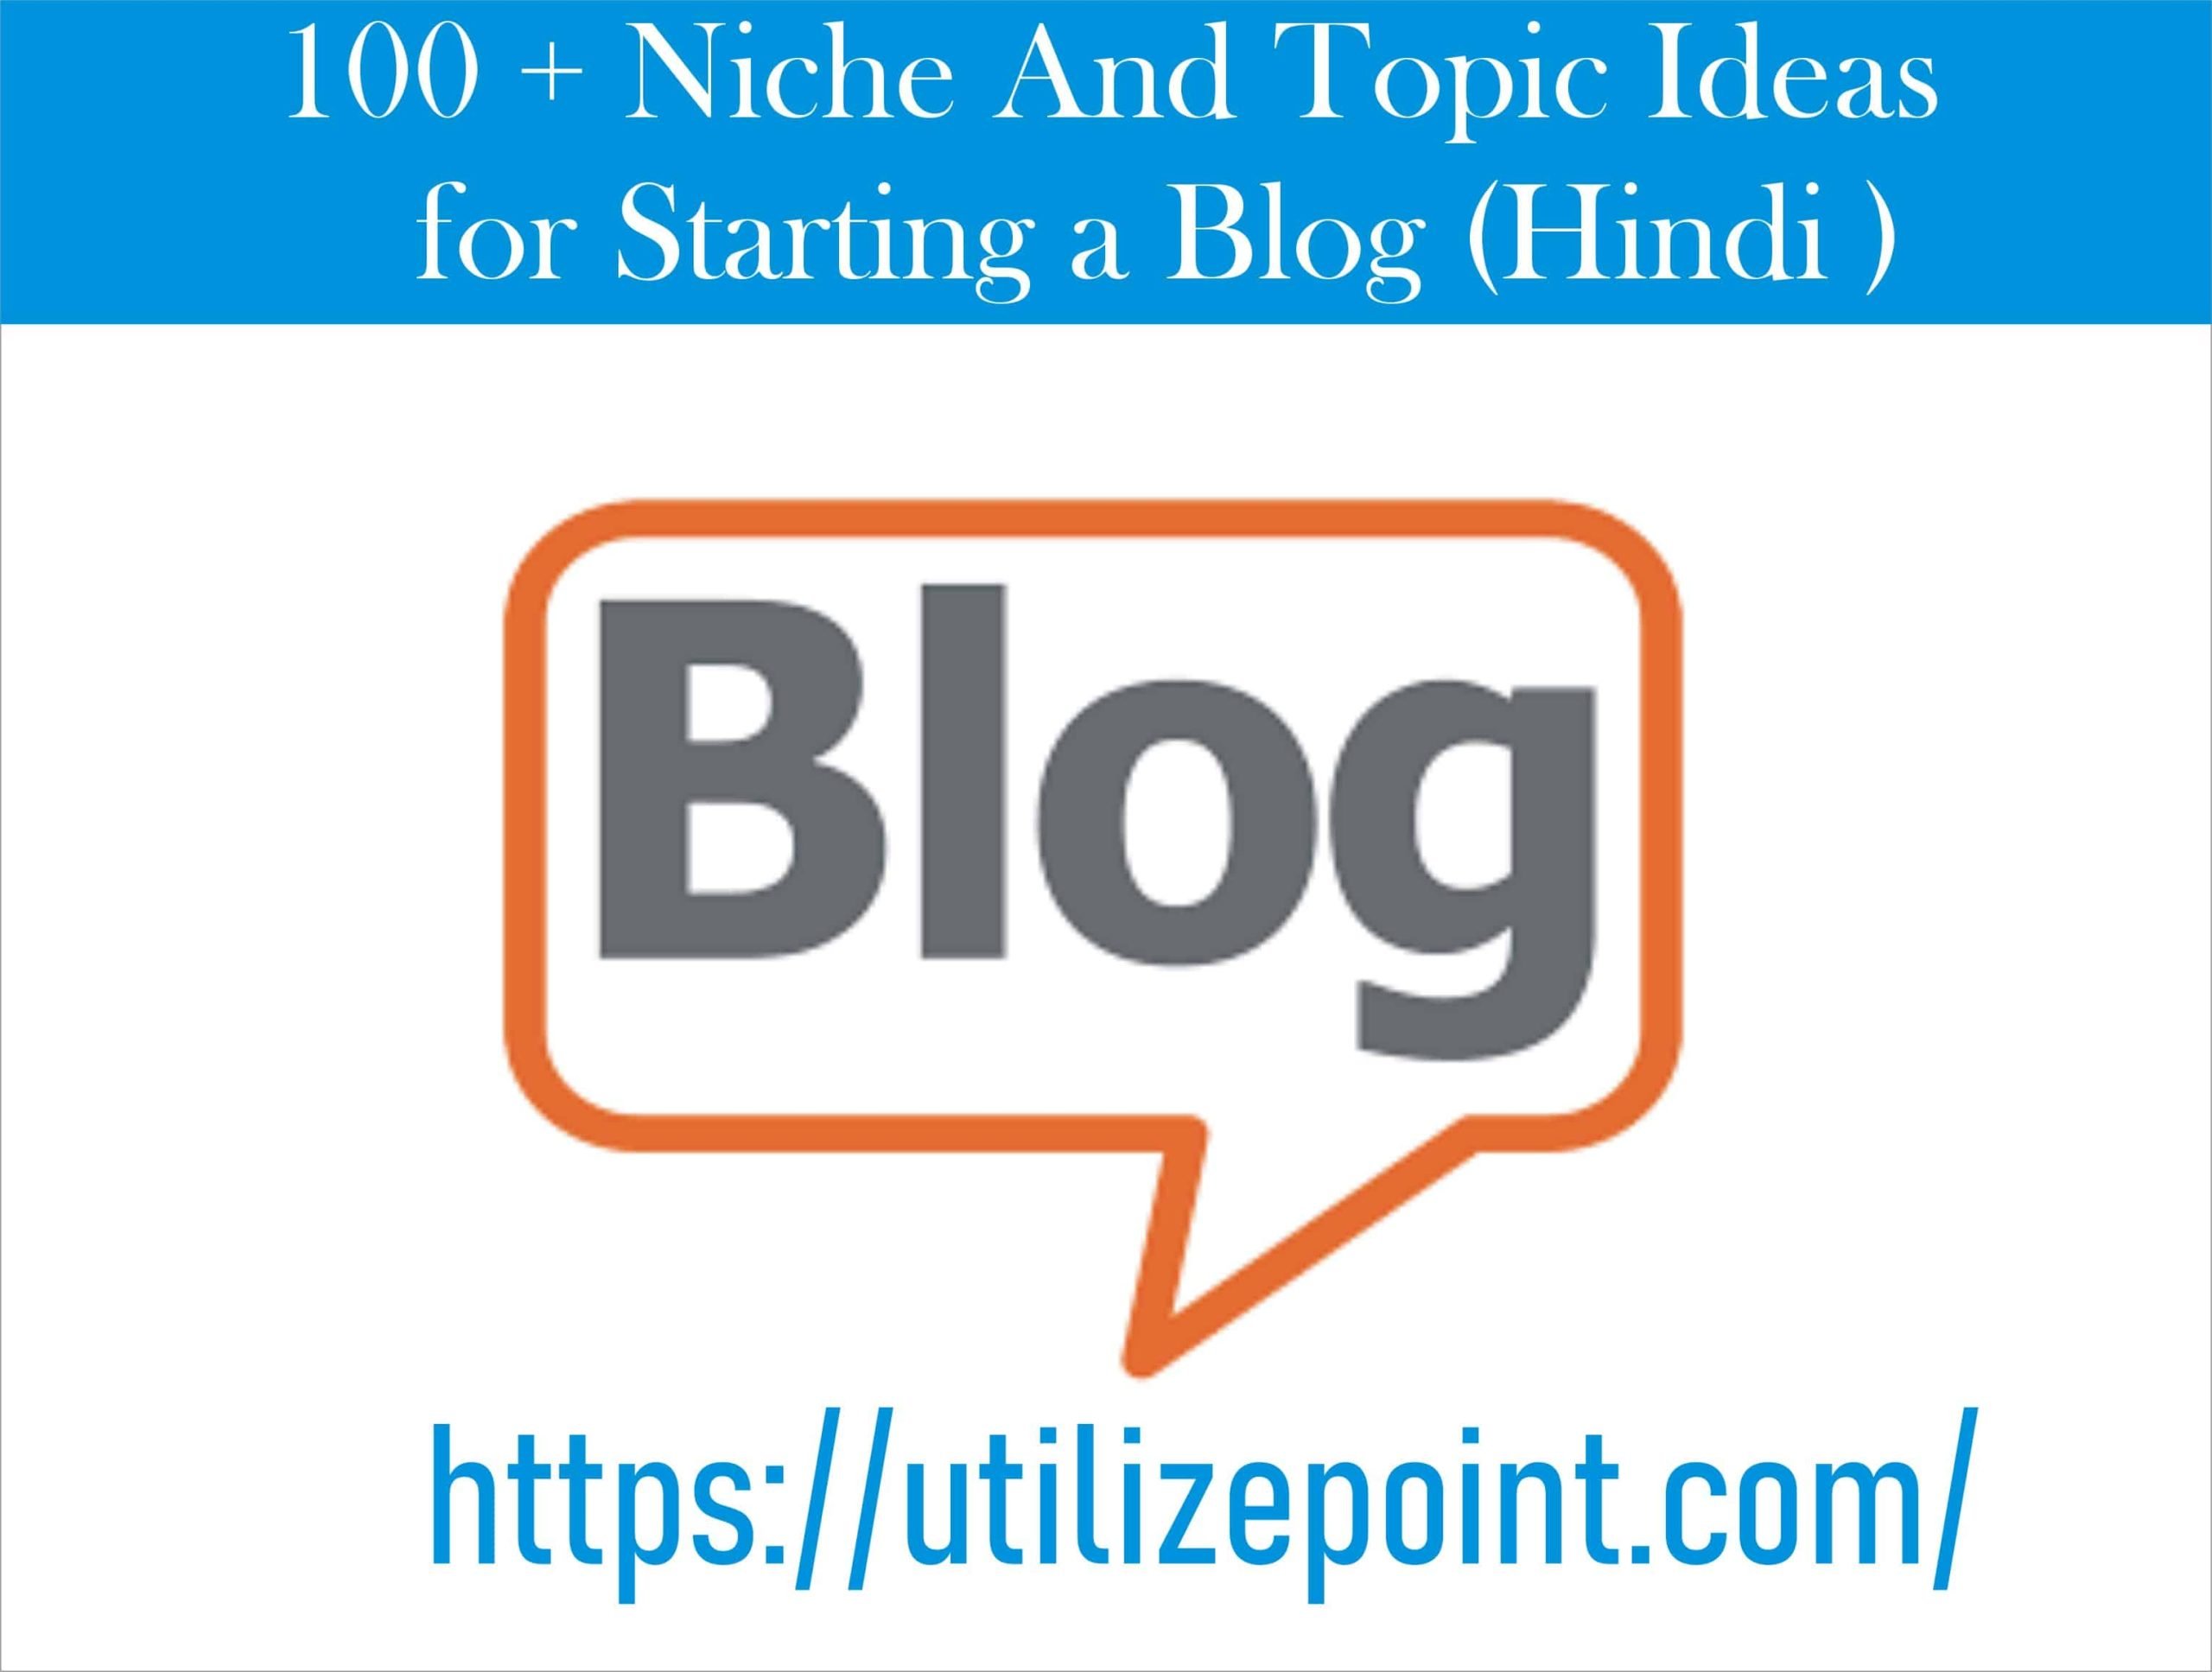 100 + Niche And Topic Ideas for Starting a Blog (Hindi )